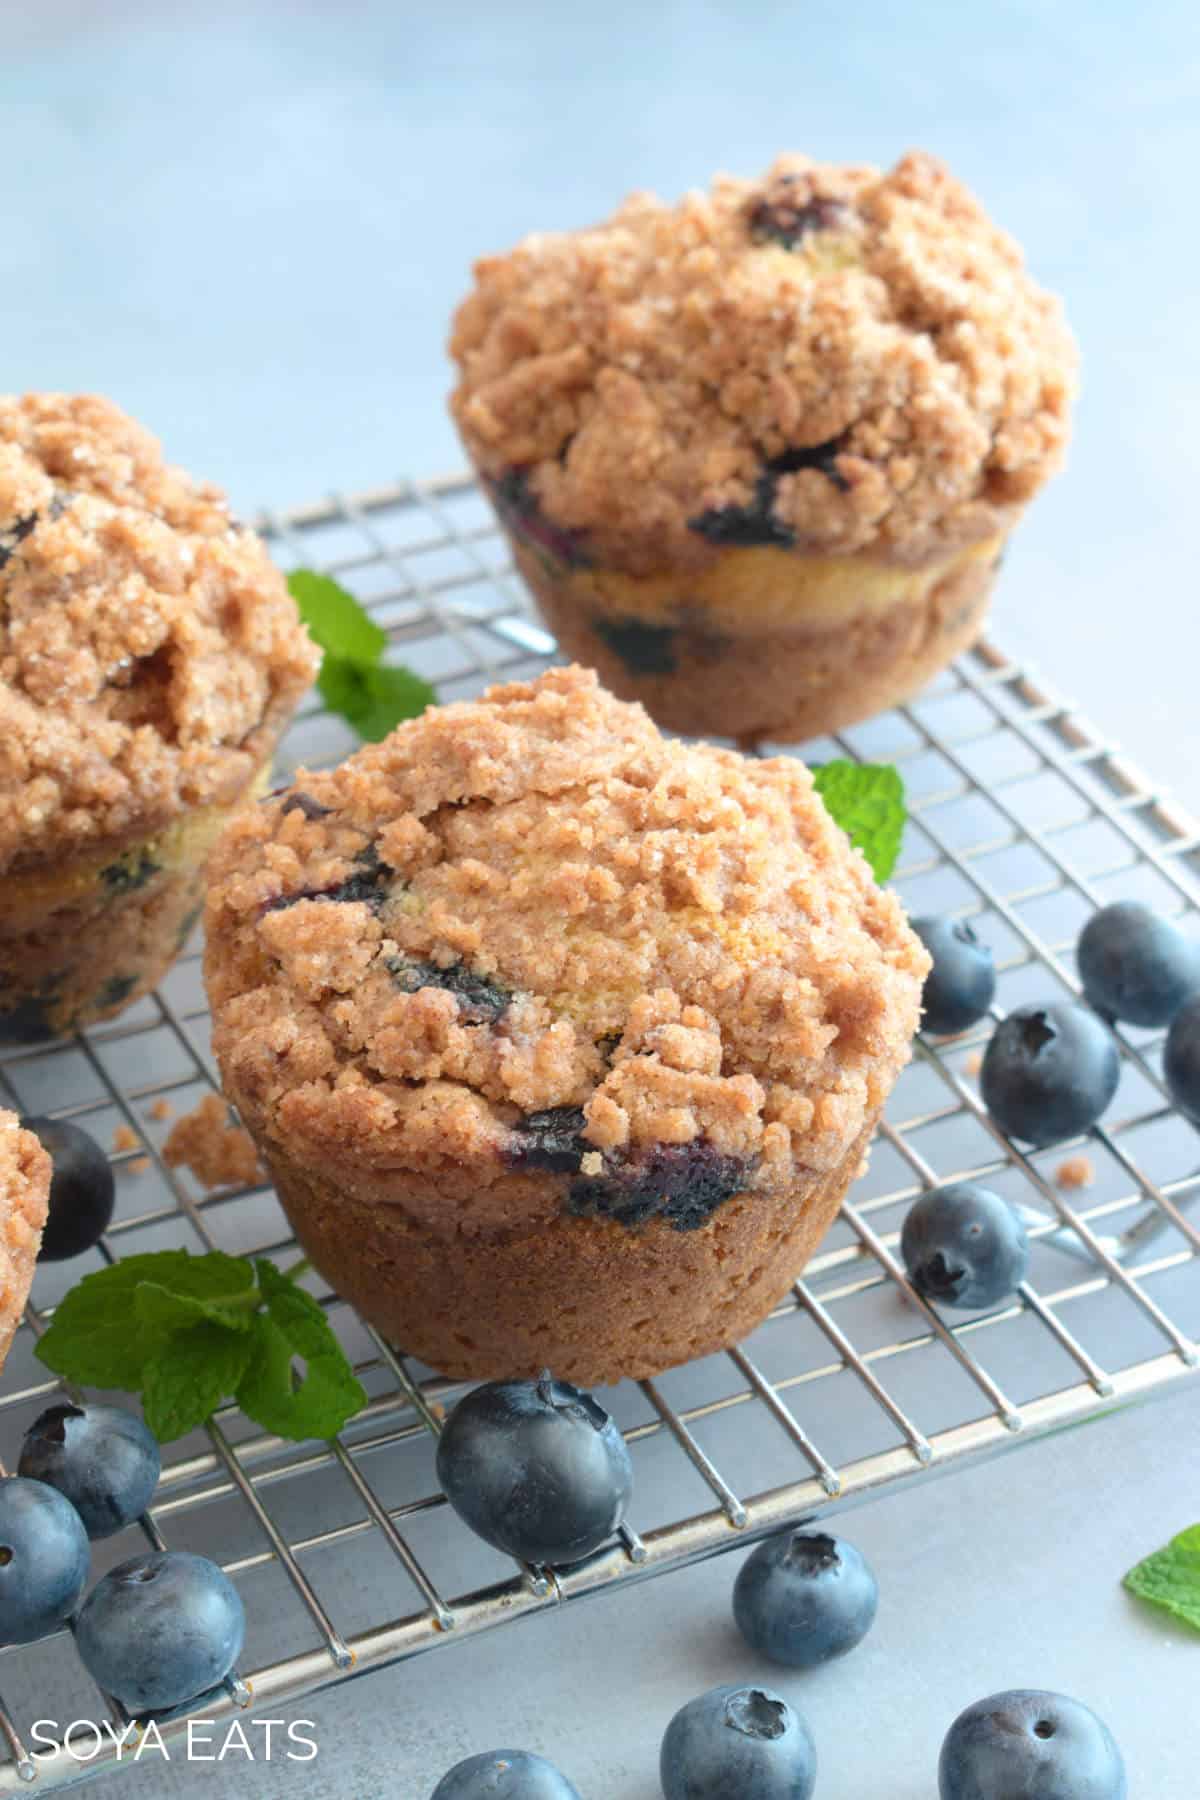 Blueberry okara muffins in a wire rack with fresh blueberries and mint leaves scattered around.